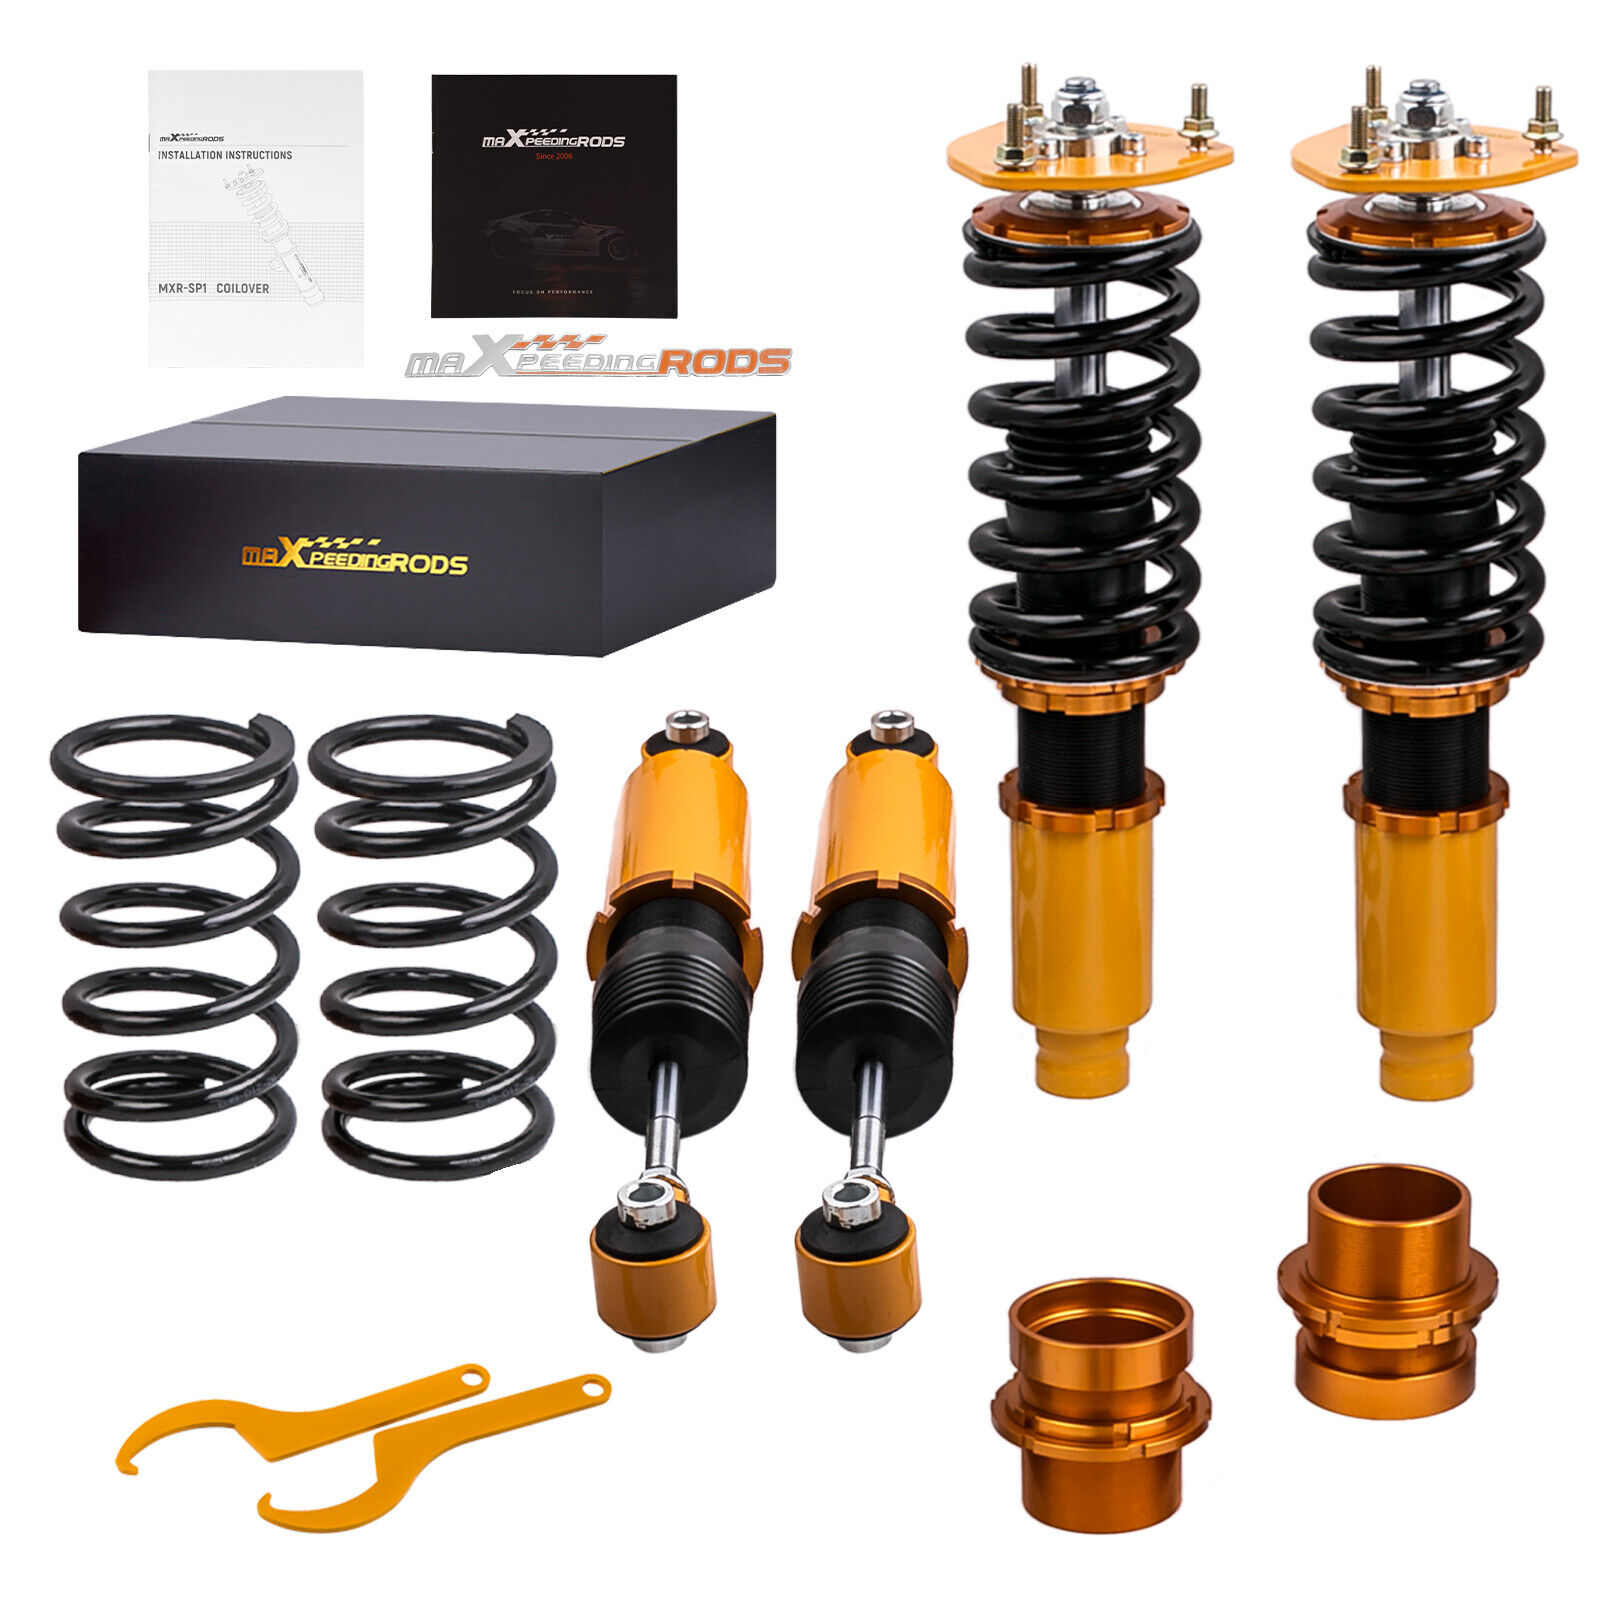 Coilovers Kit for Mazda 6 for mazdaspeed6 2003-2007 Adj Height Shock Absorbers